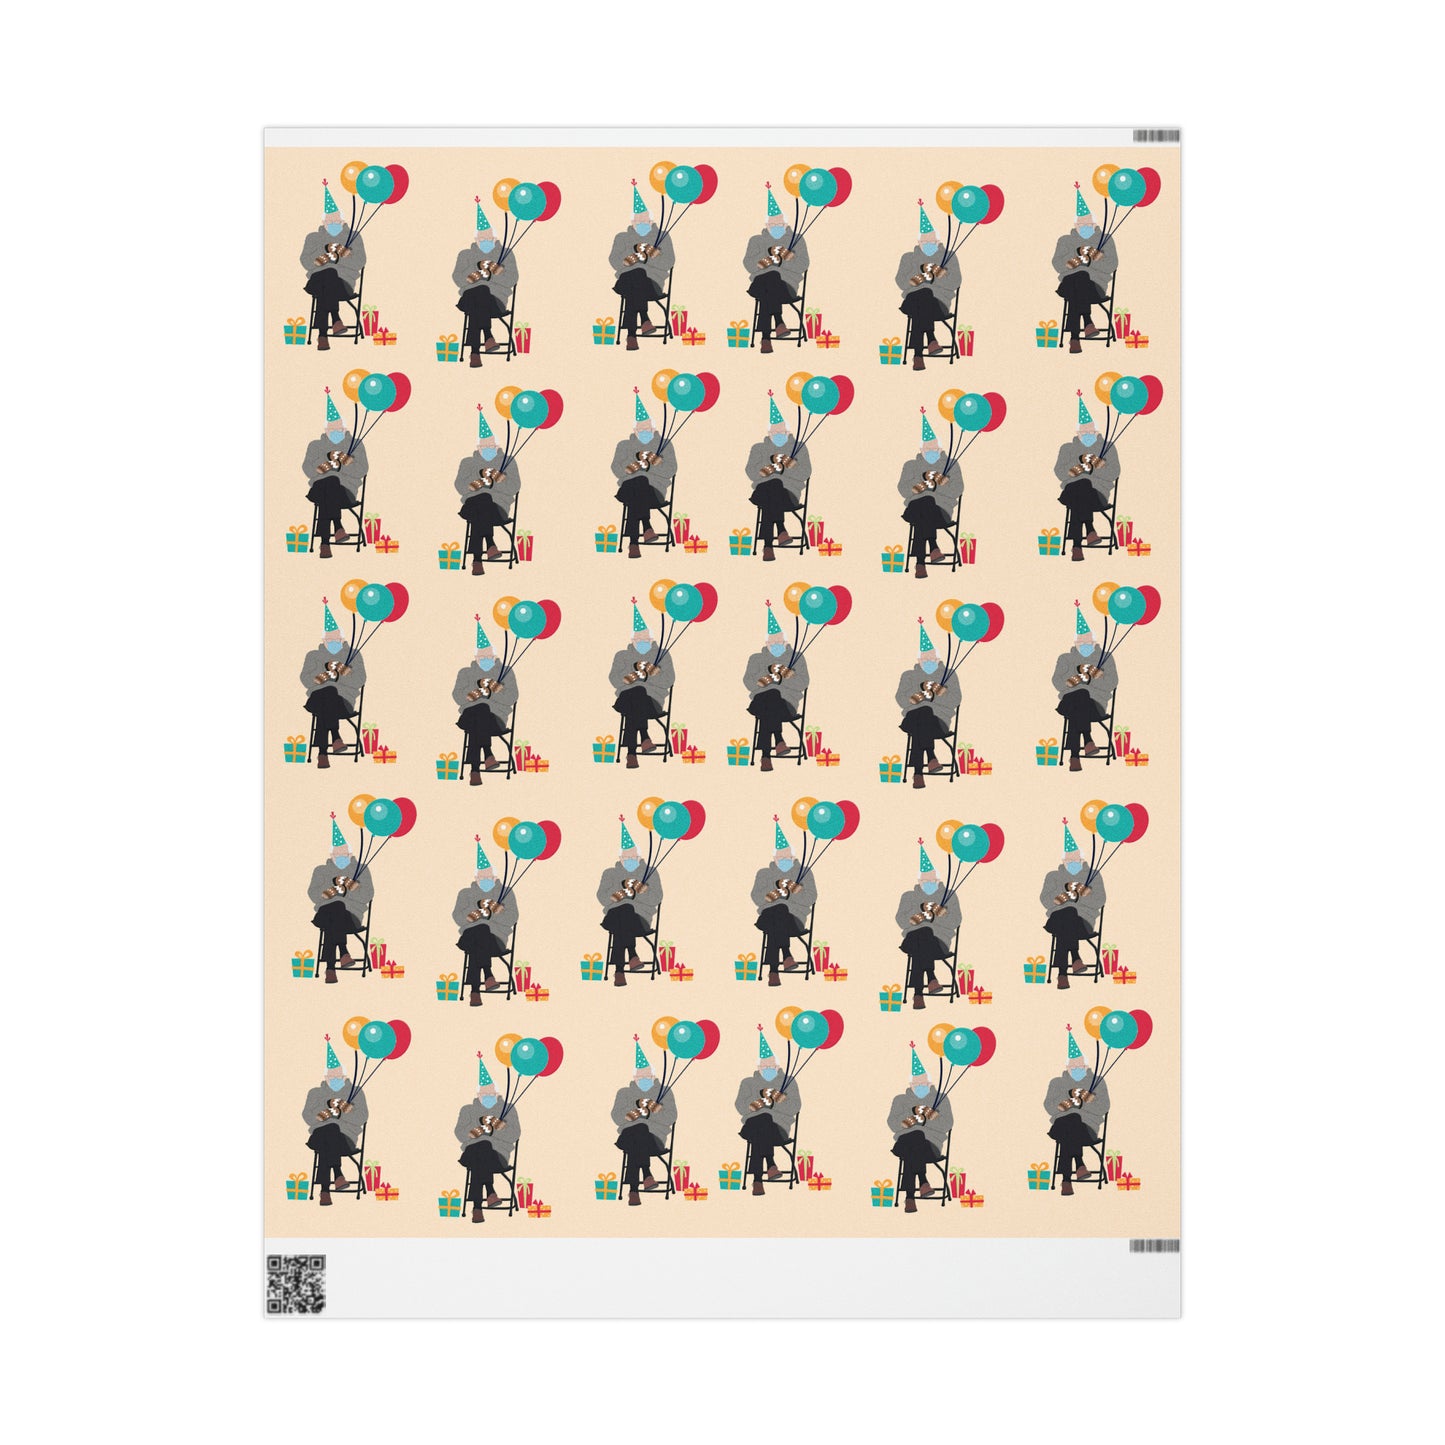 Funny Bernie Mittens Wrapping Paper Gift Bernie Sanders Meme Mittens Gift Birthday Wrapping